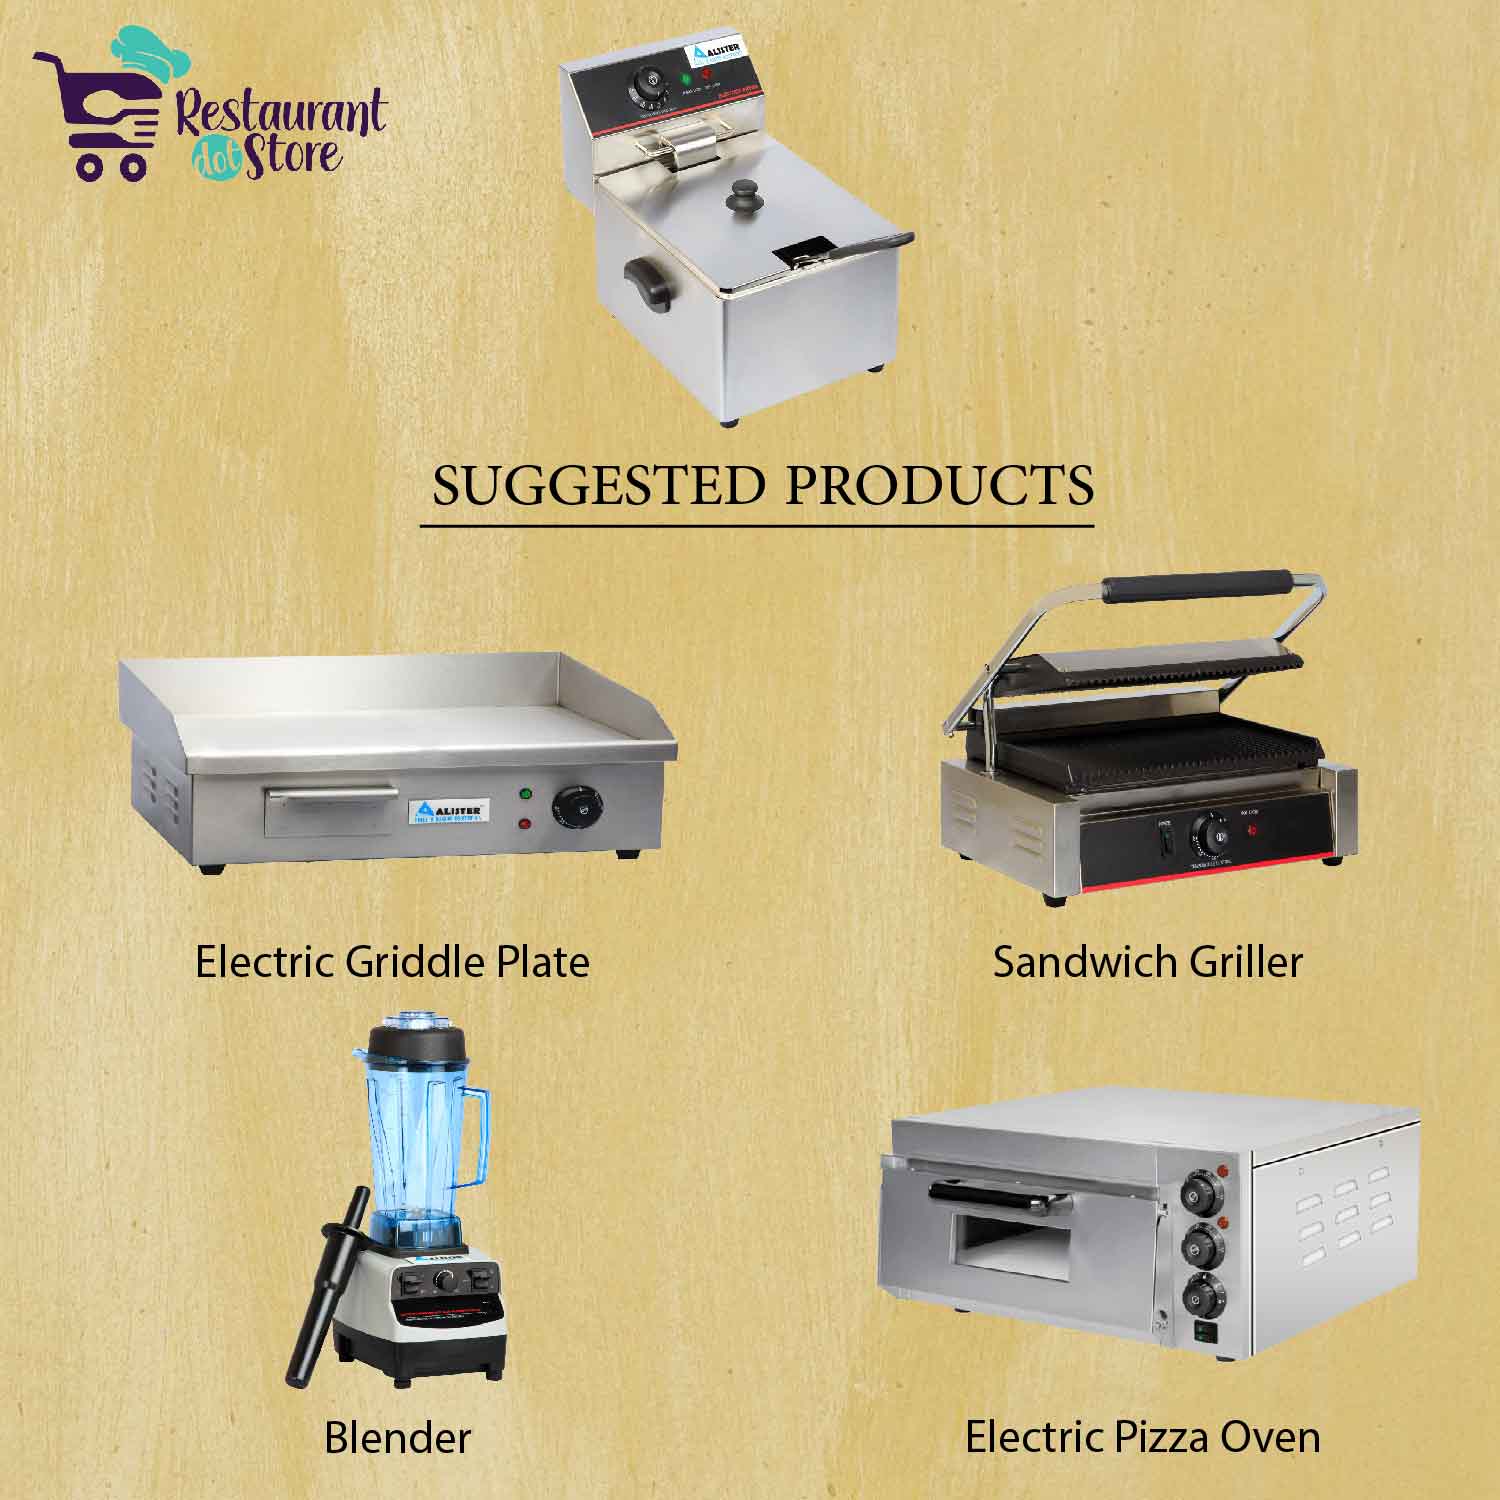 Alister Commercial electric fryers